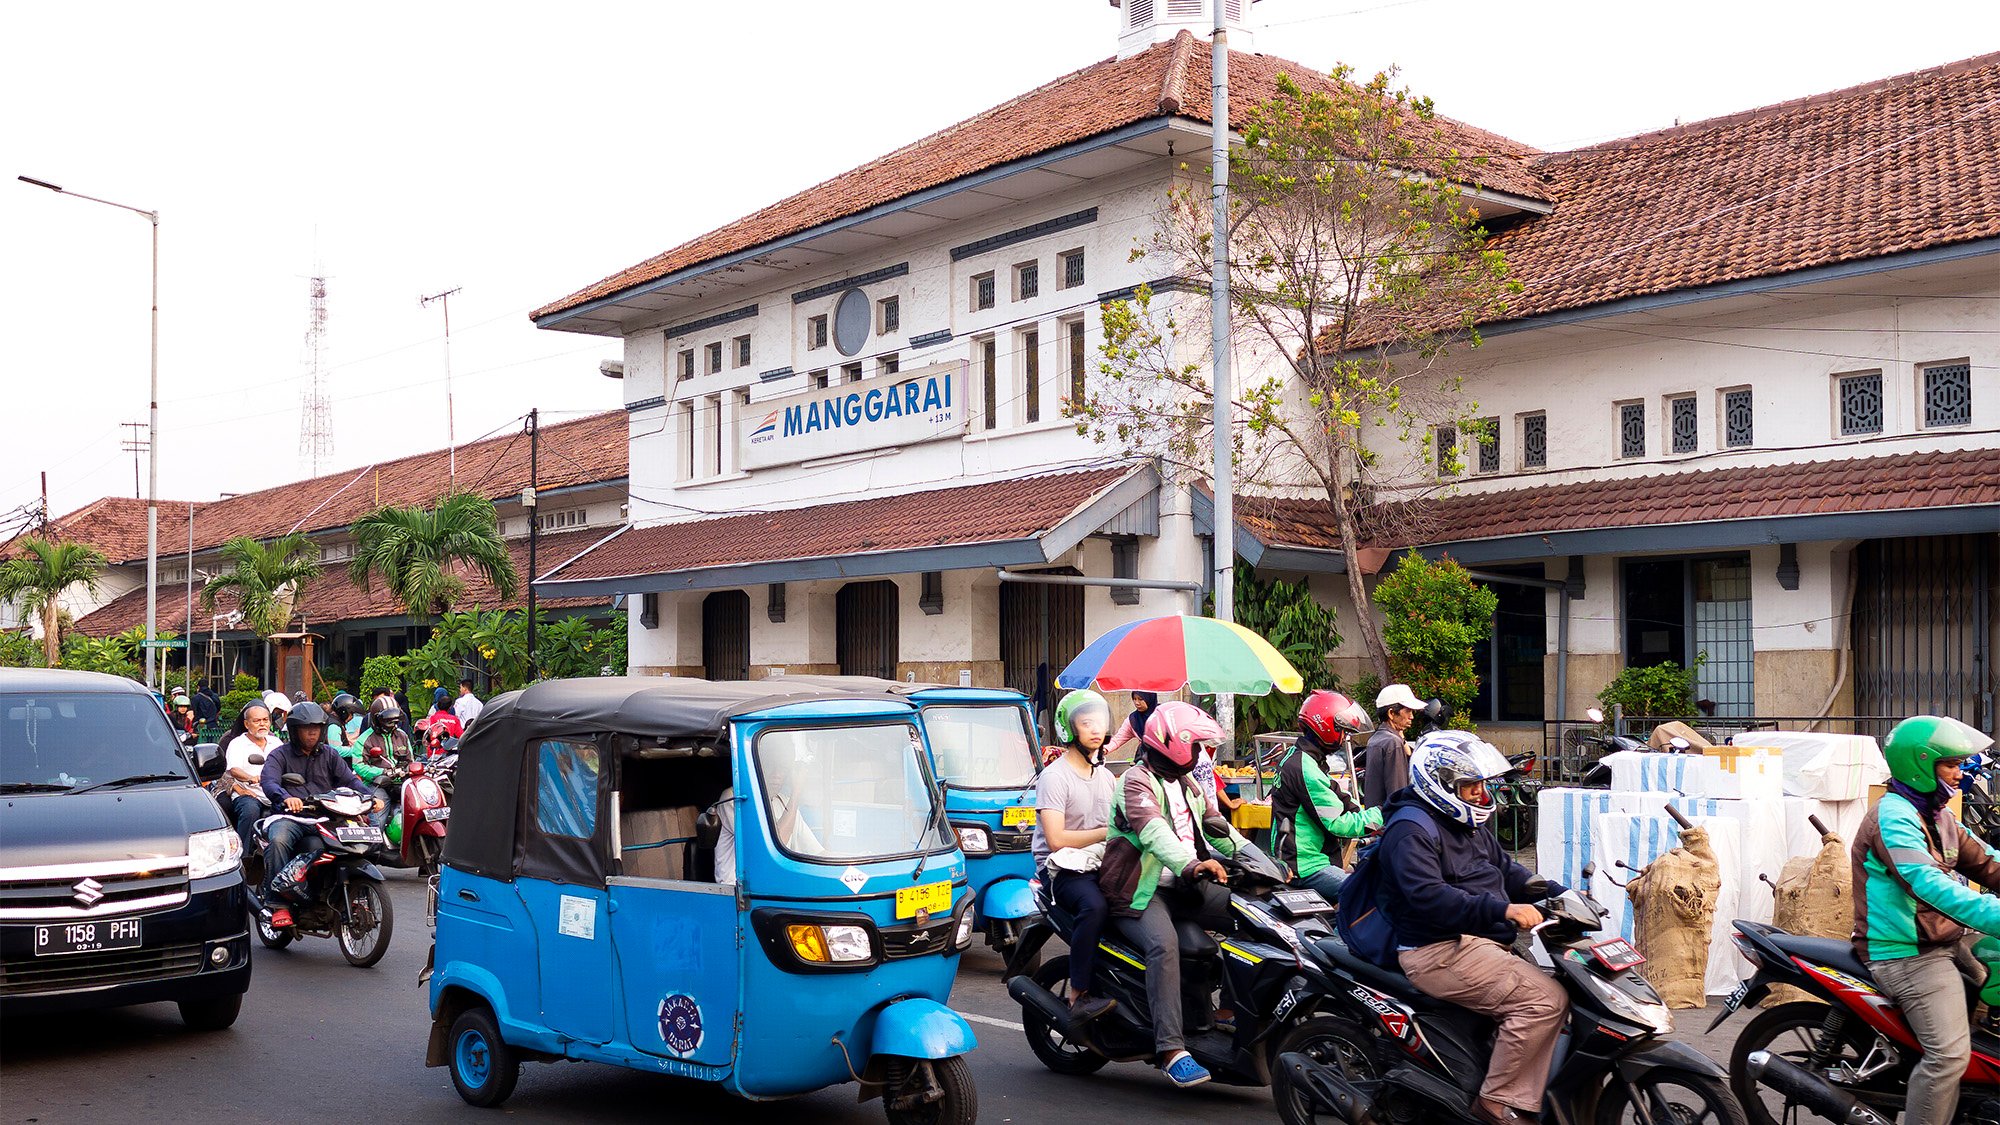 Manggarai Station is one of the busiest stations of the rail network studied 